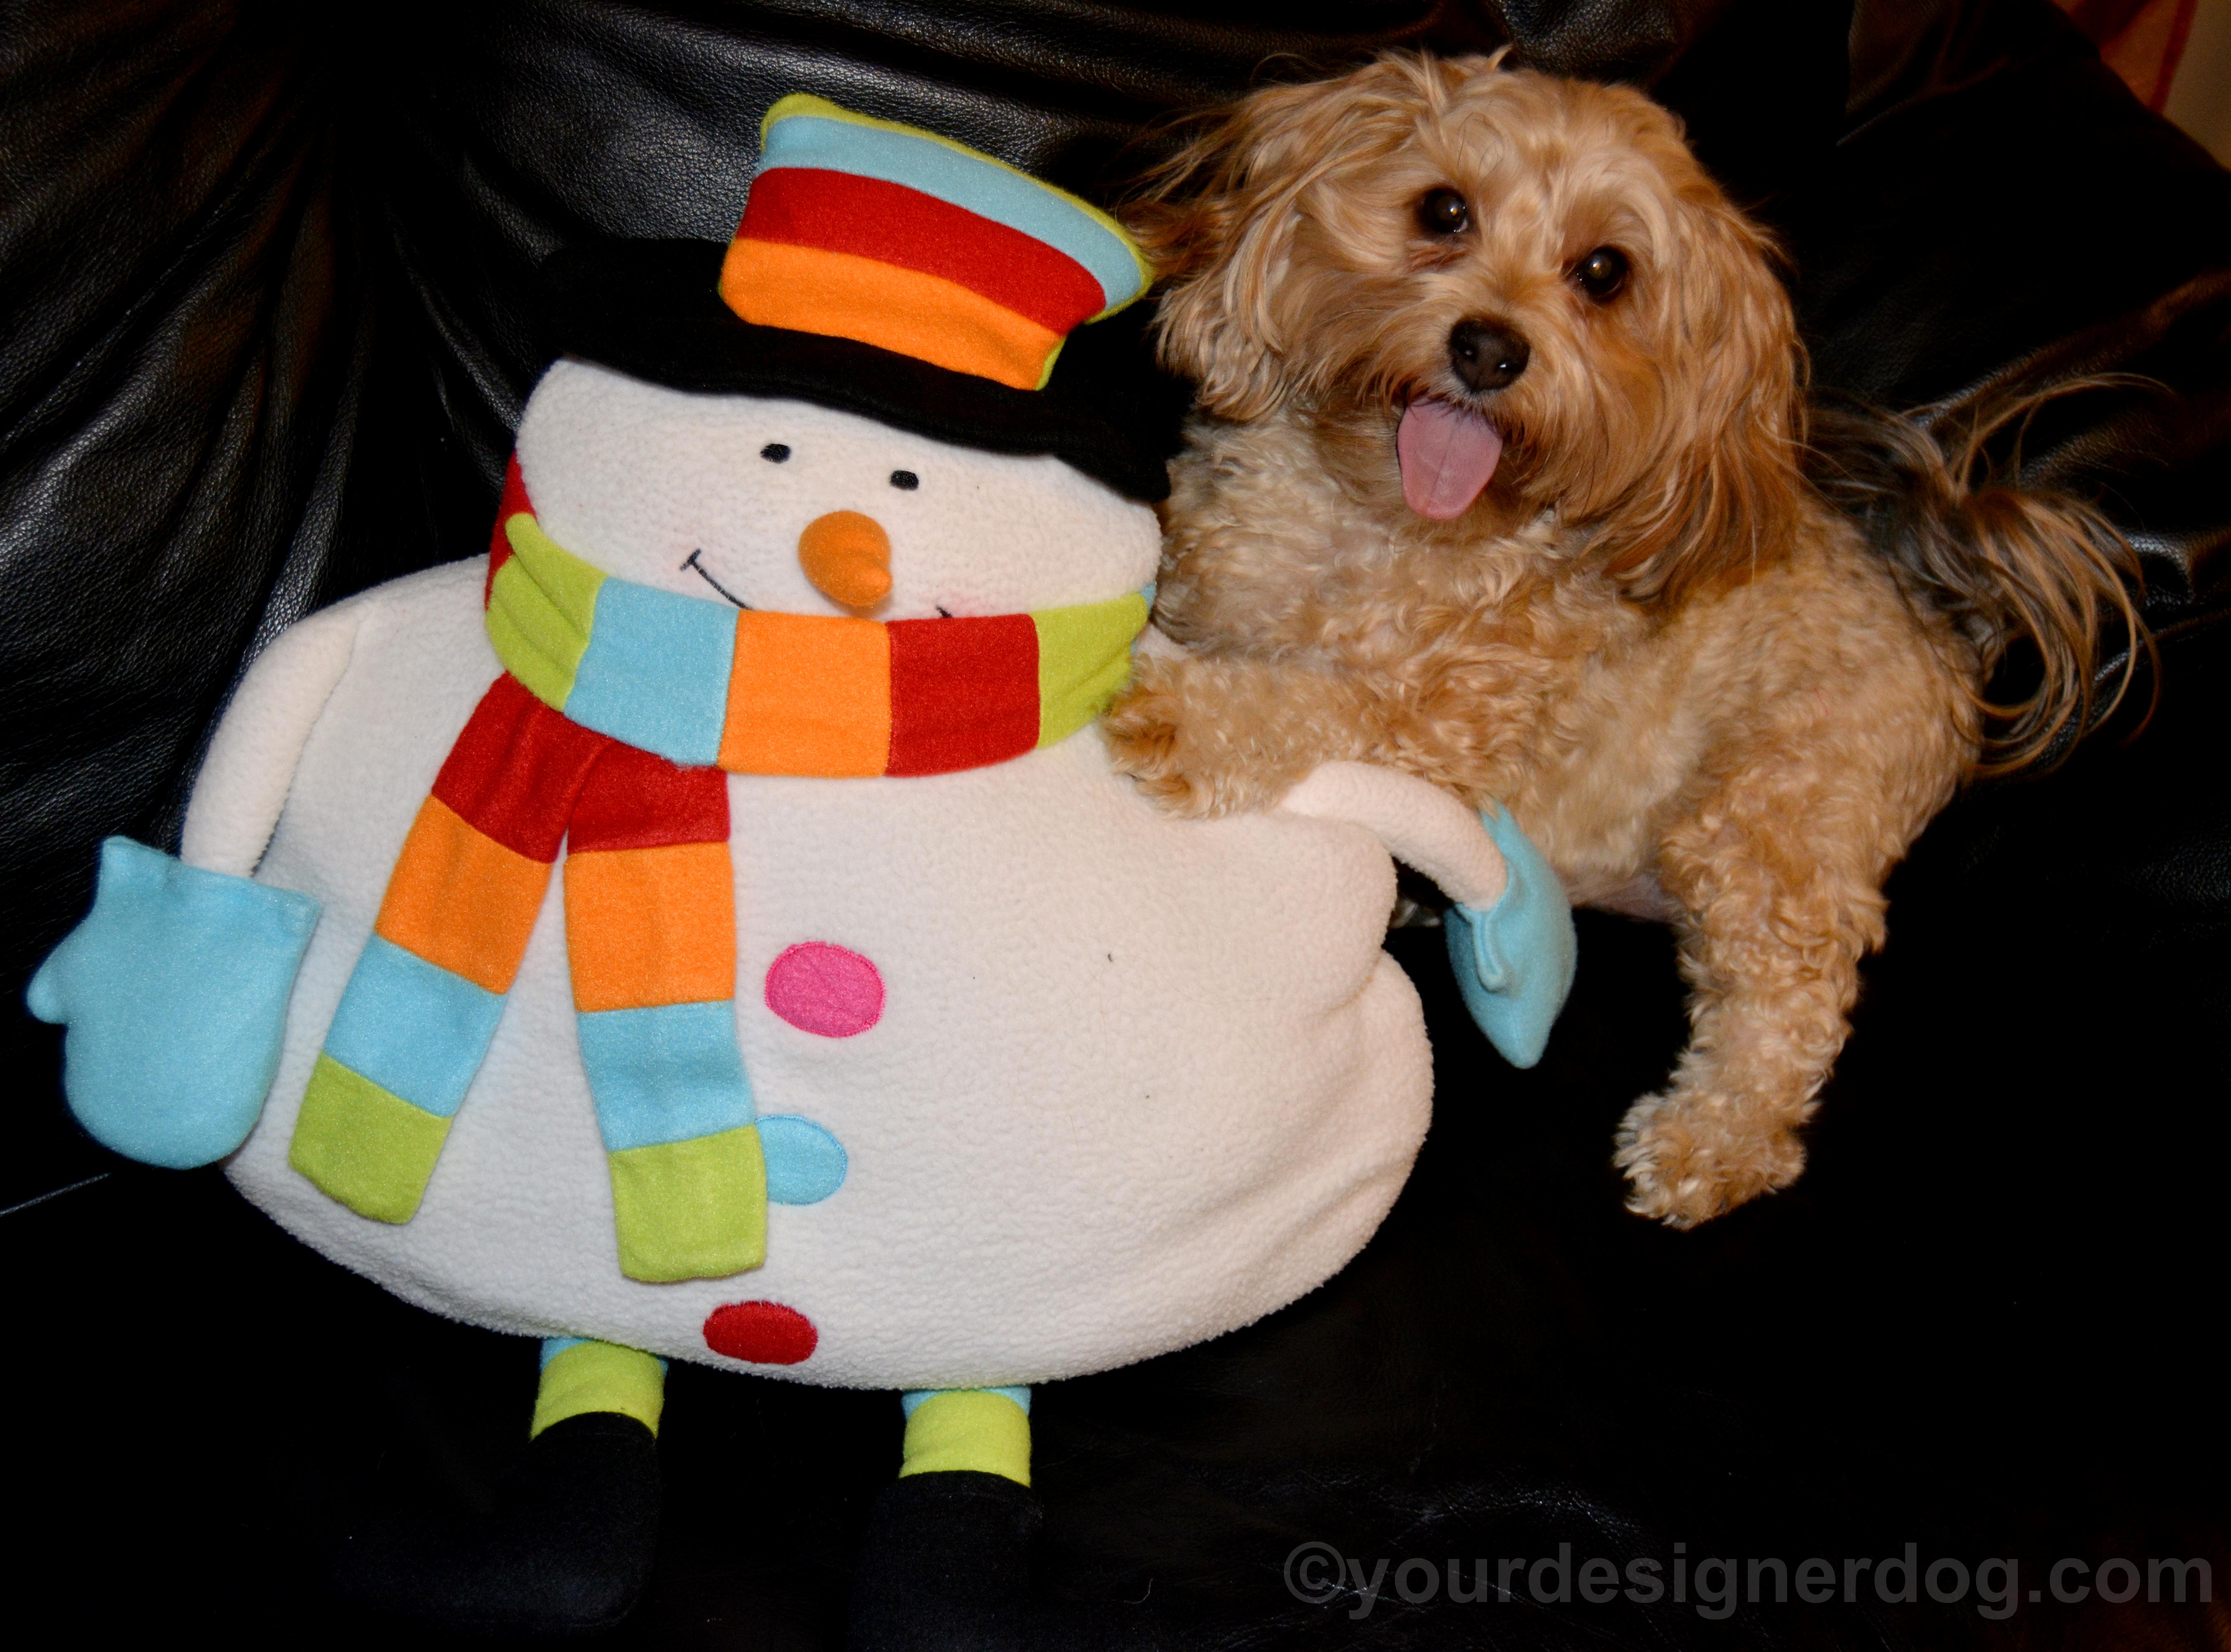 dogs, designer dogs, yorkipoo, yorkie poo, snowman, winter, tongue out